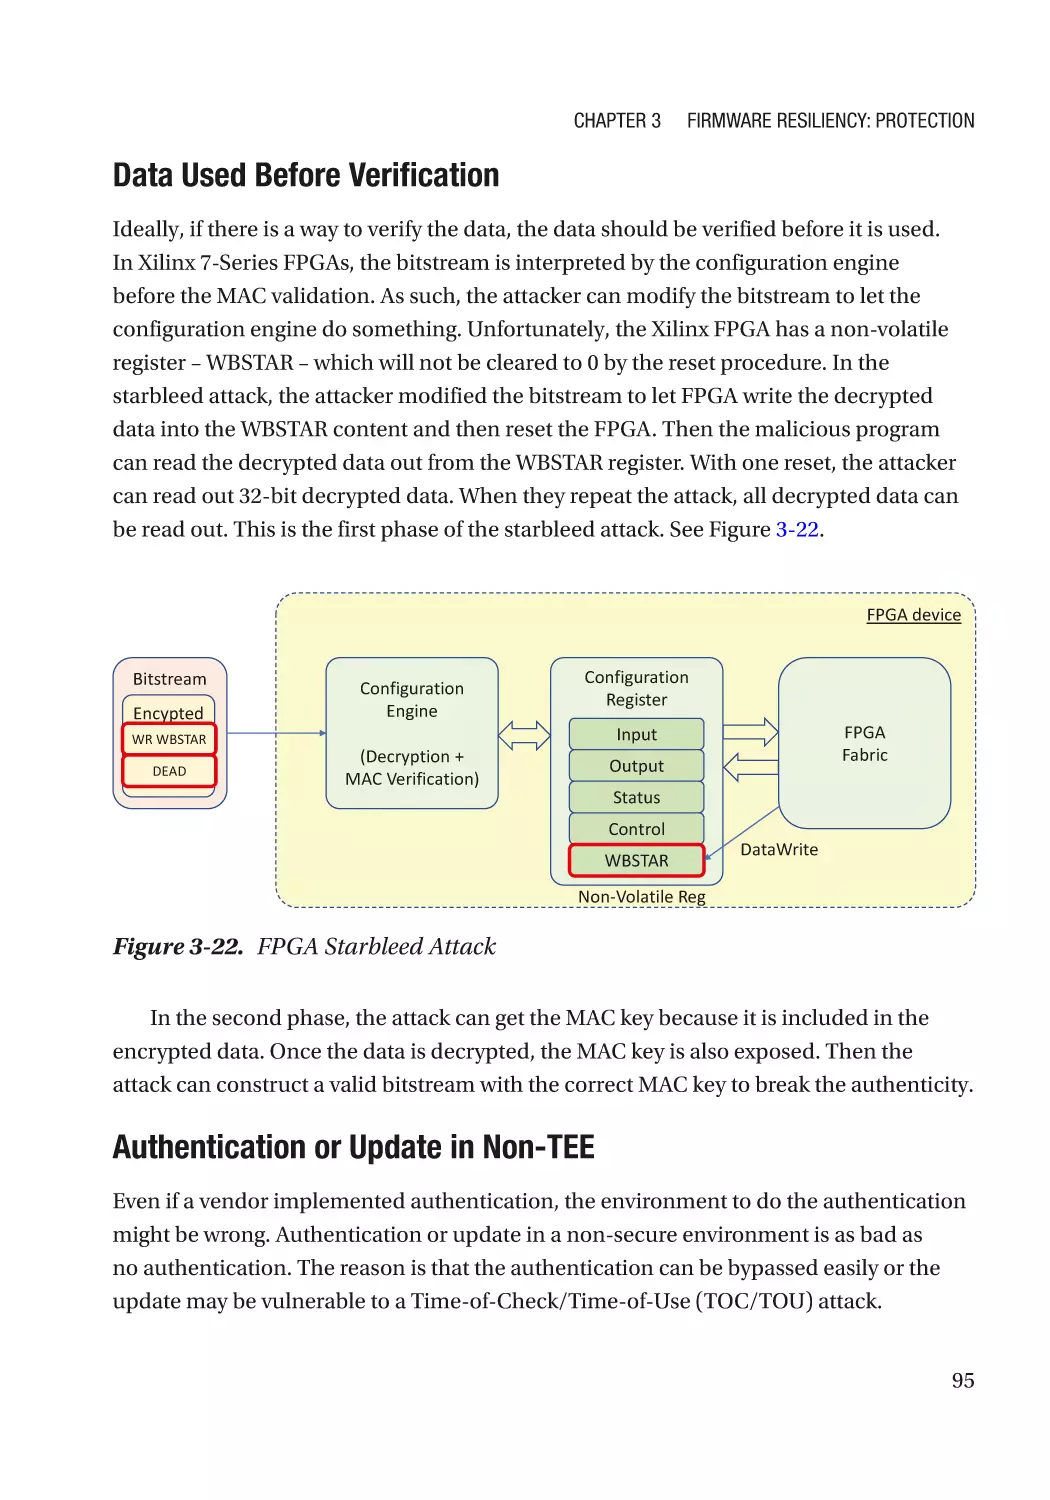 Data Used Before Verification
Authentication or Update in Non-TEE